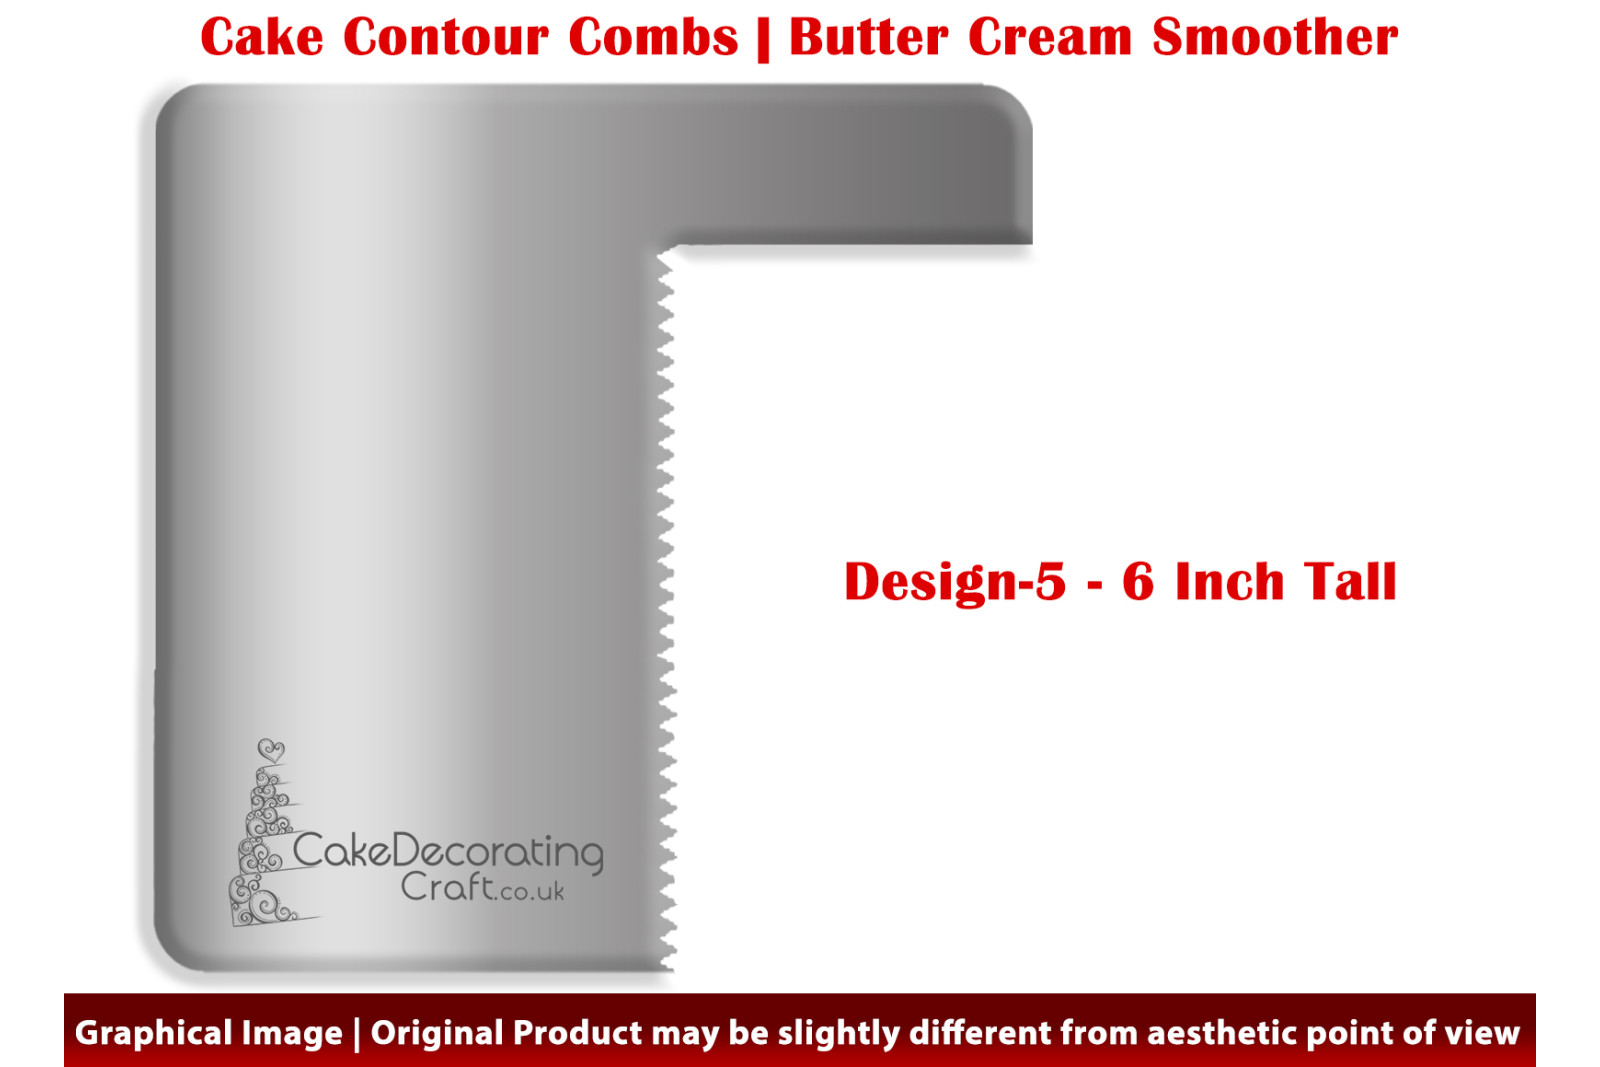 Zig Zag | 6 Inch | Cake Decorating Craft | Cake Contour Combs | Smoothing | Metal Spreader | Butter Cream Smoothing | Genius Tool